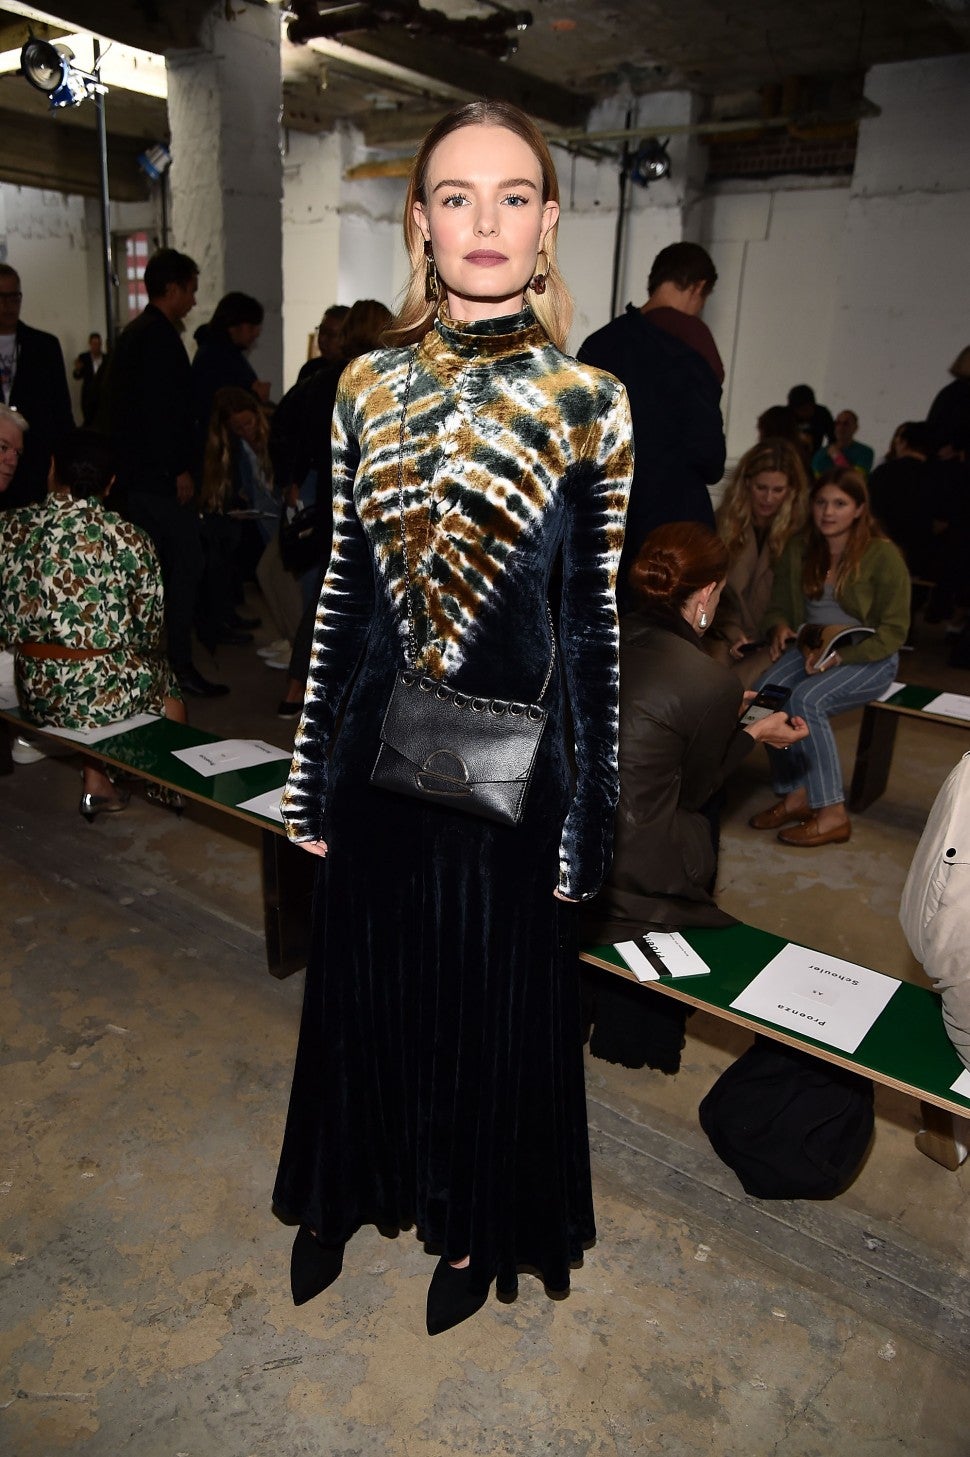 Kate Bosworth at the Proenza Schouler show.